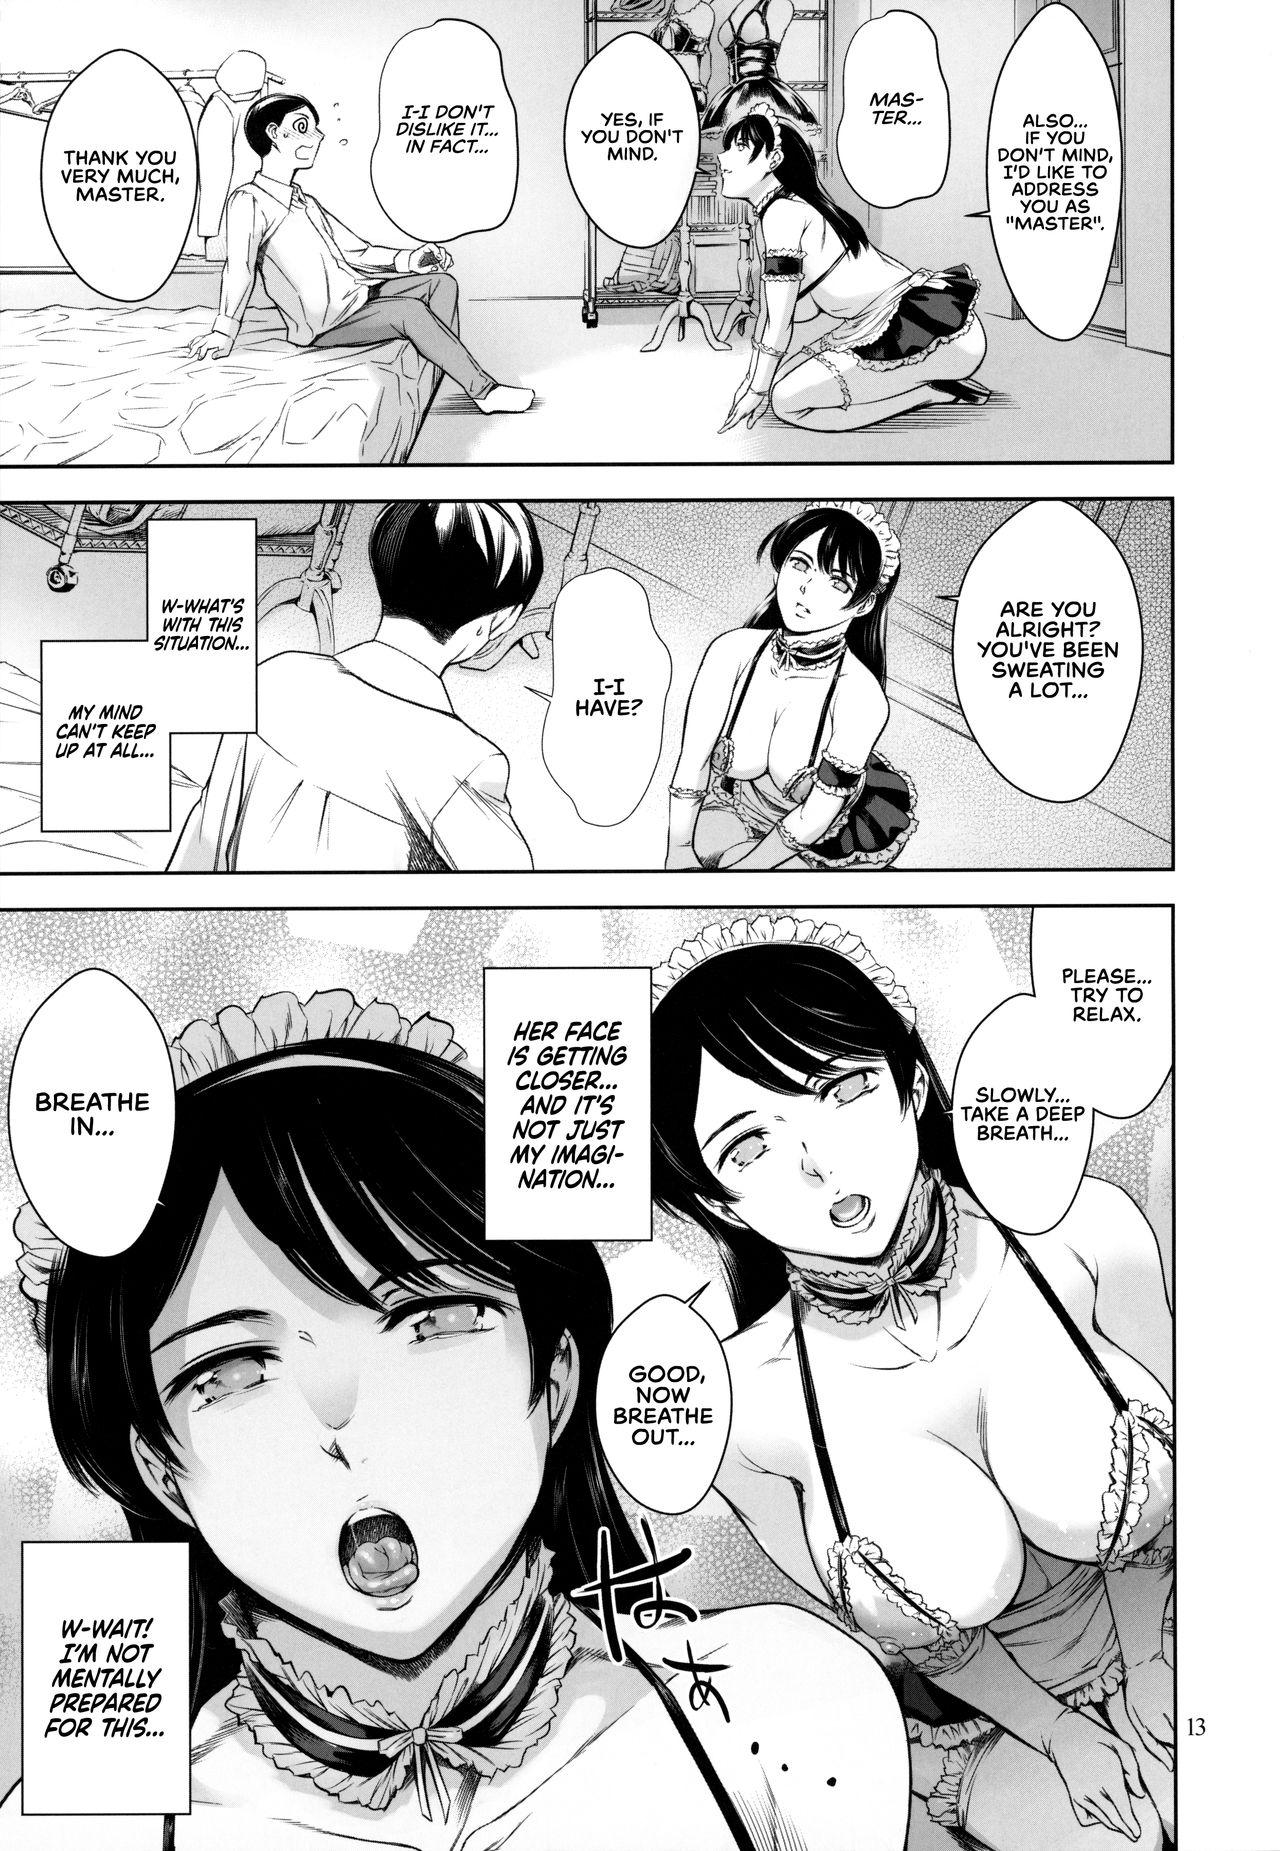 Peeing Uchi no Maid | My Housemaid - Original Doublepenetration - Page 12